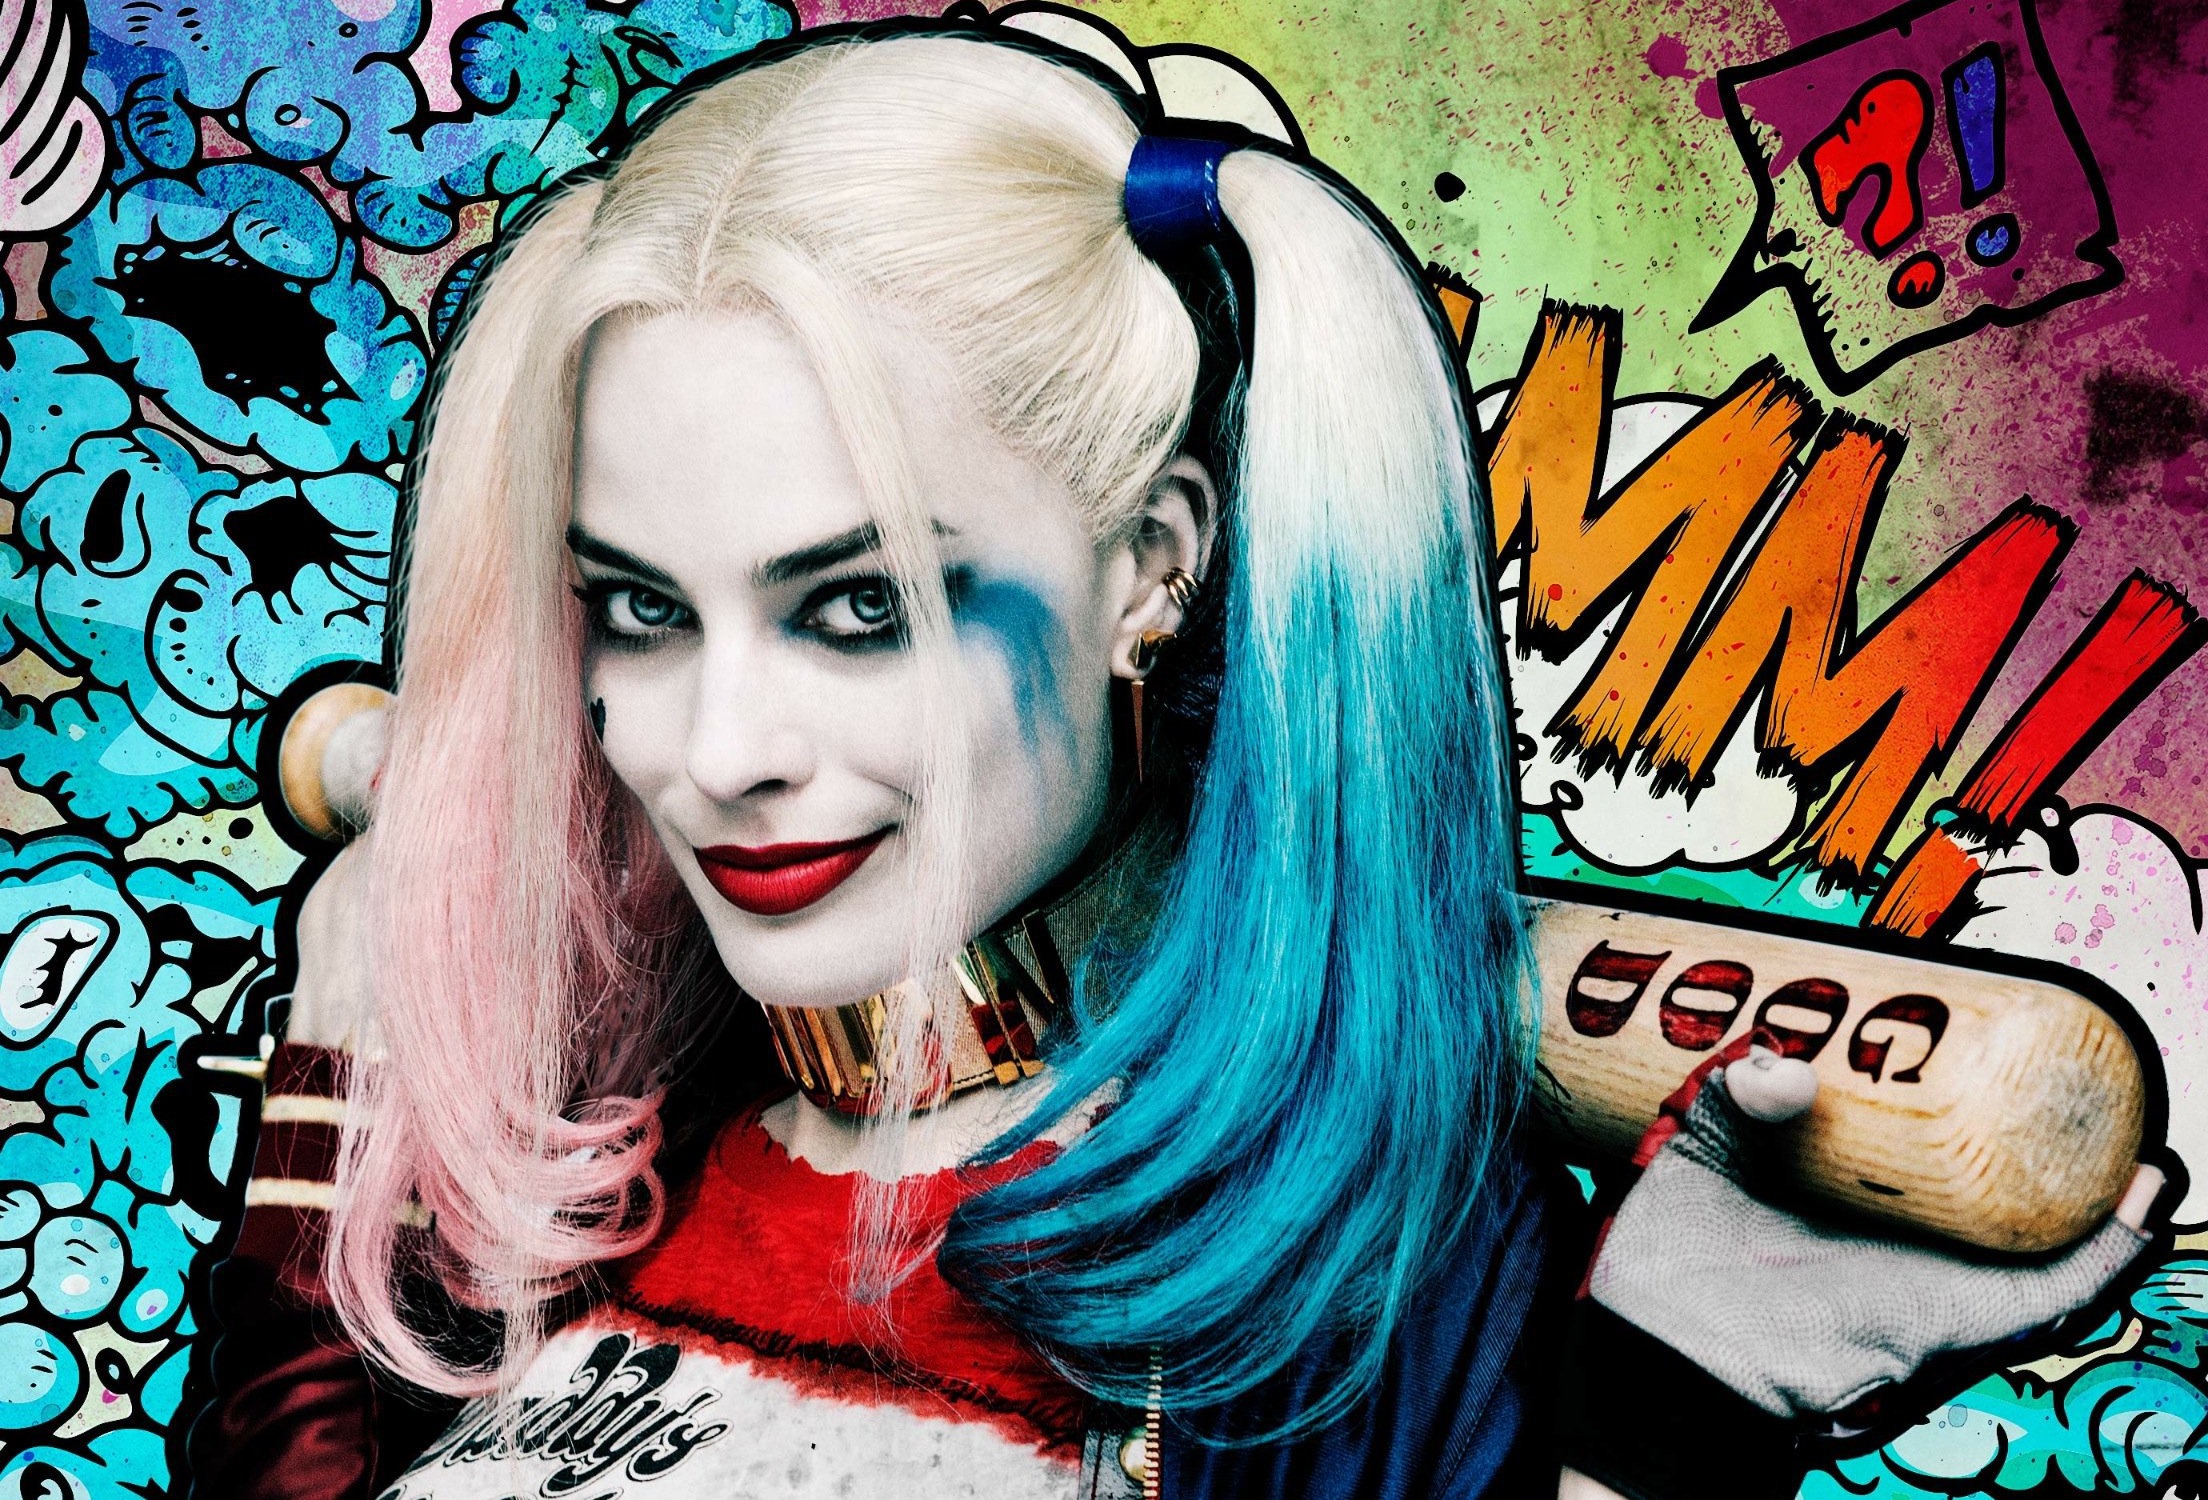 harley quinn, suicide squad, movie, baseball bat, blonde, blue eyes, dc comics, margot robbie, smile, two toned hair lock screen backgrounds